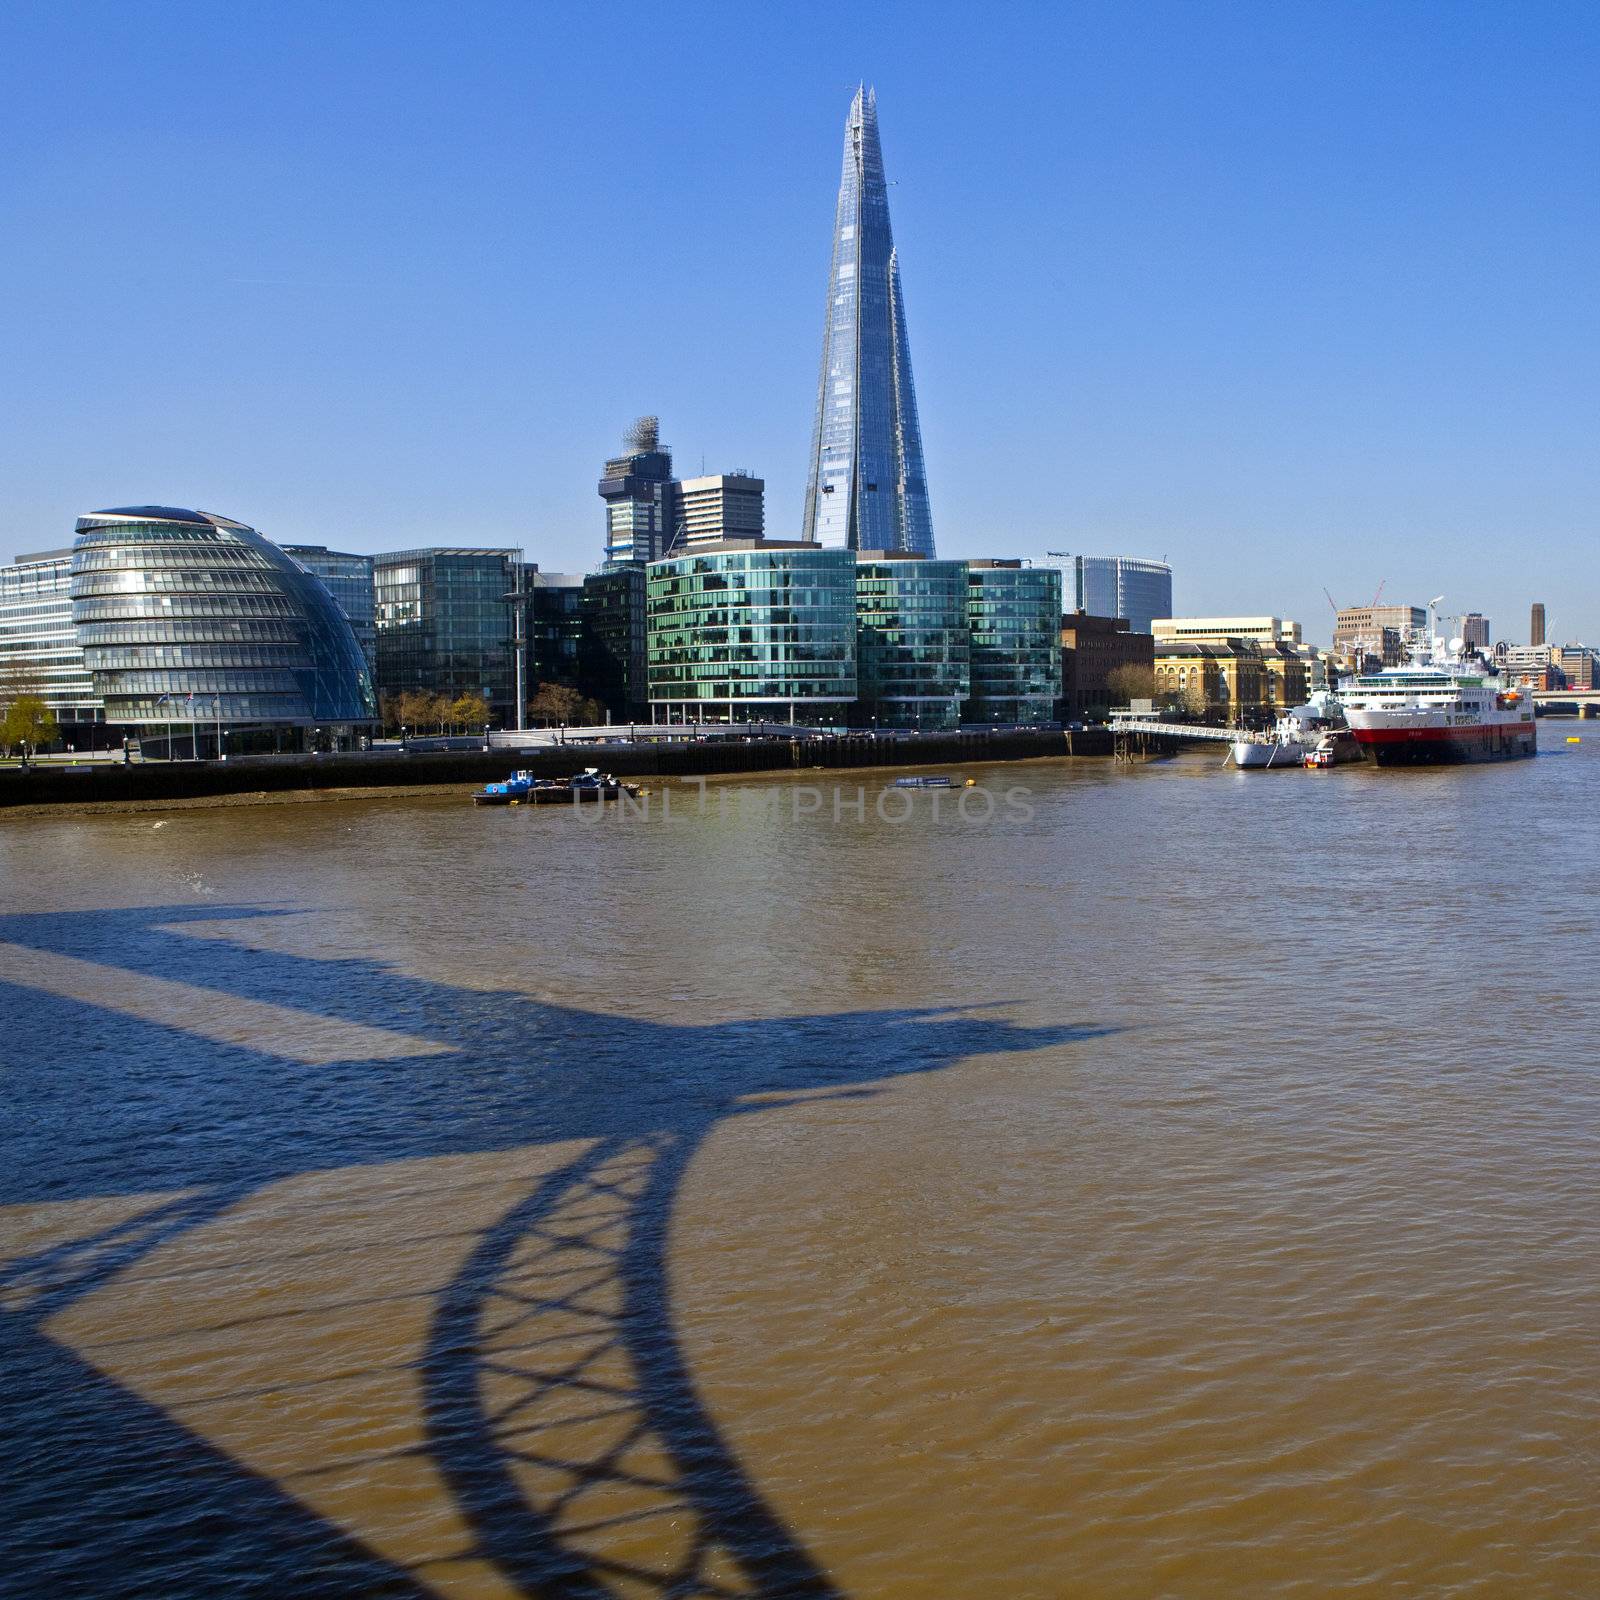 A view taking in the Shard, City Hall, the HMS Belfast and a shadow of Tower Bridge in the River Thames in London.